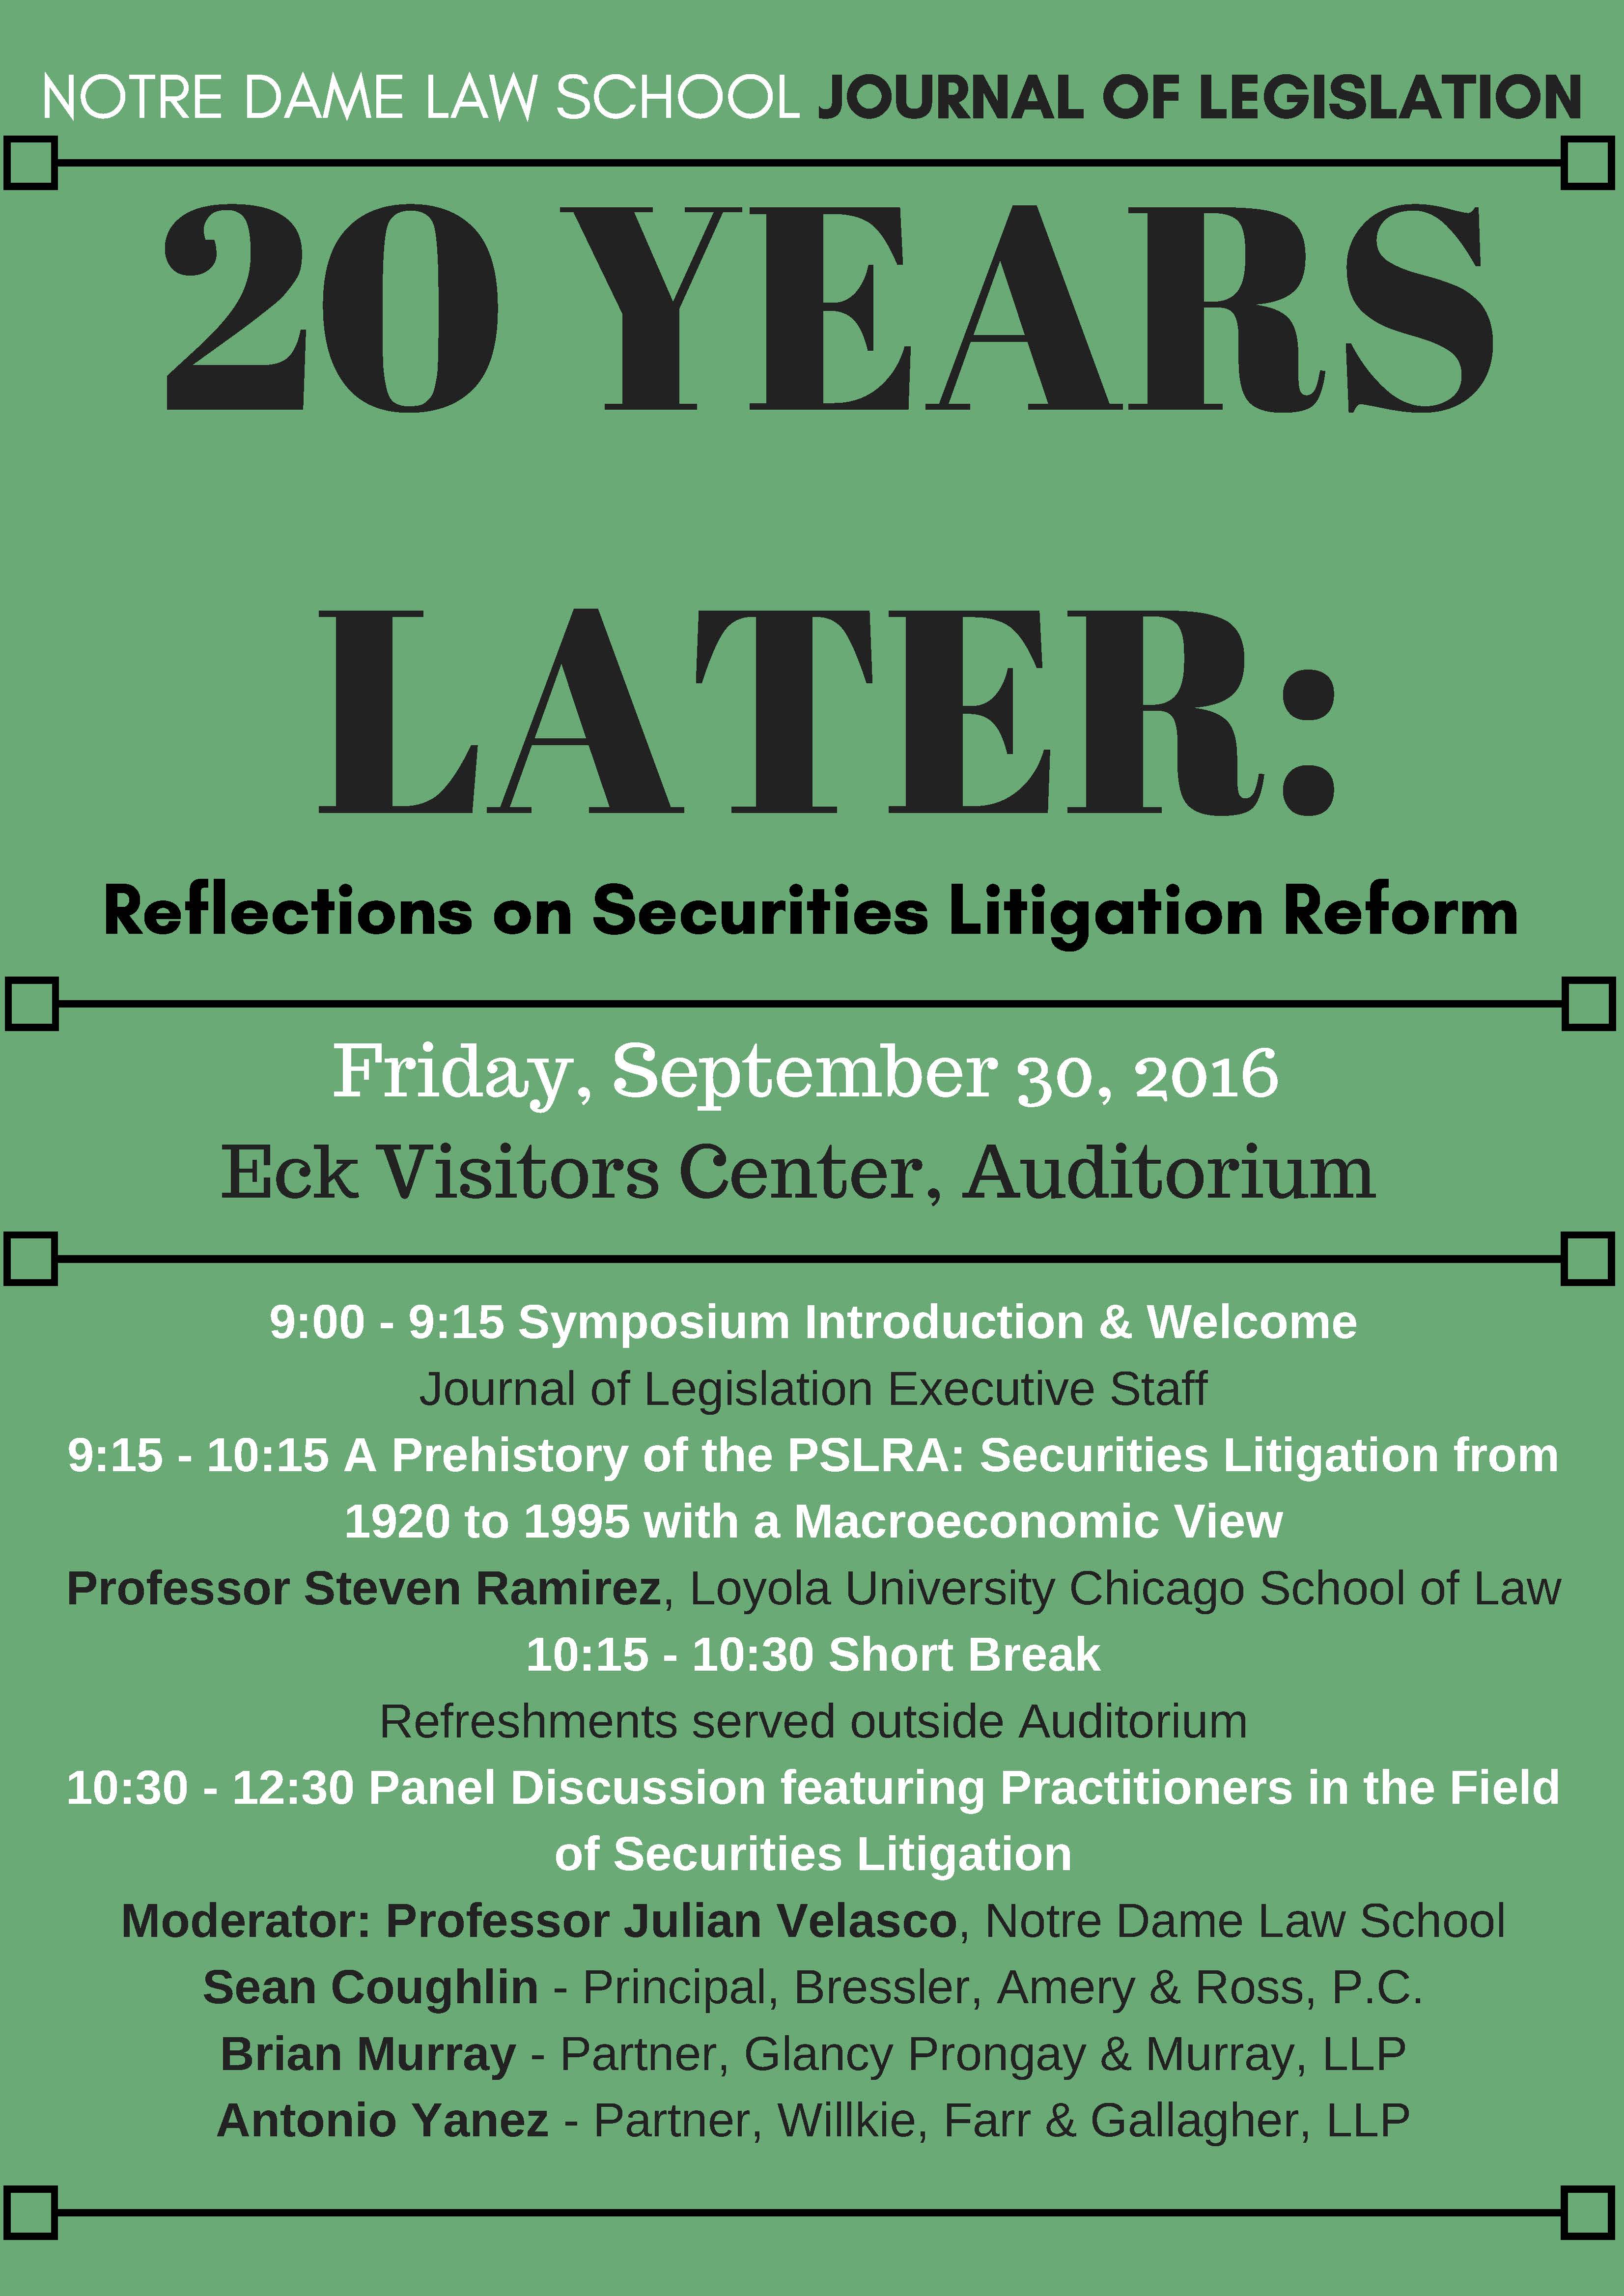 2016 - 20 Years Later: Reflections on Securities Litigation Reform